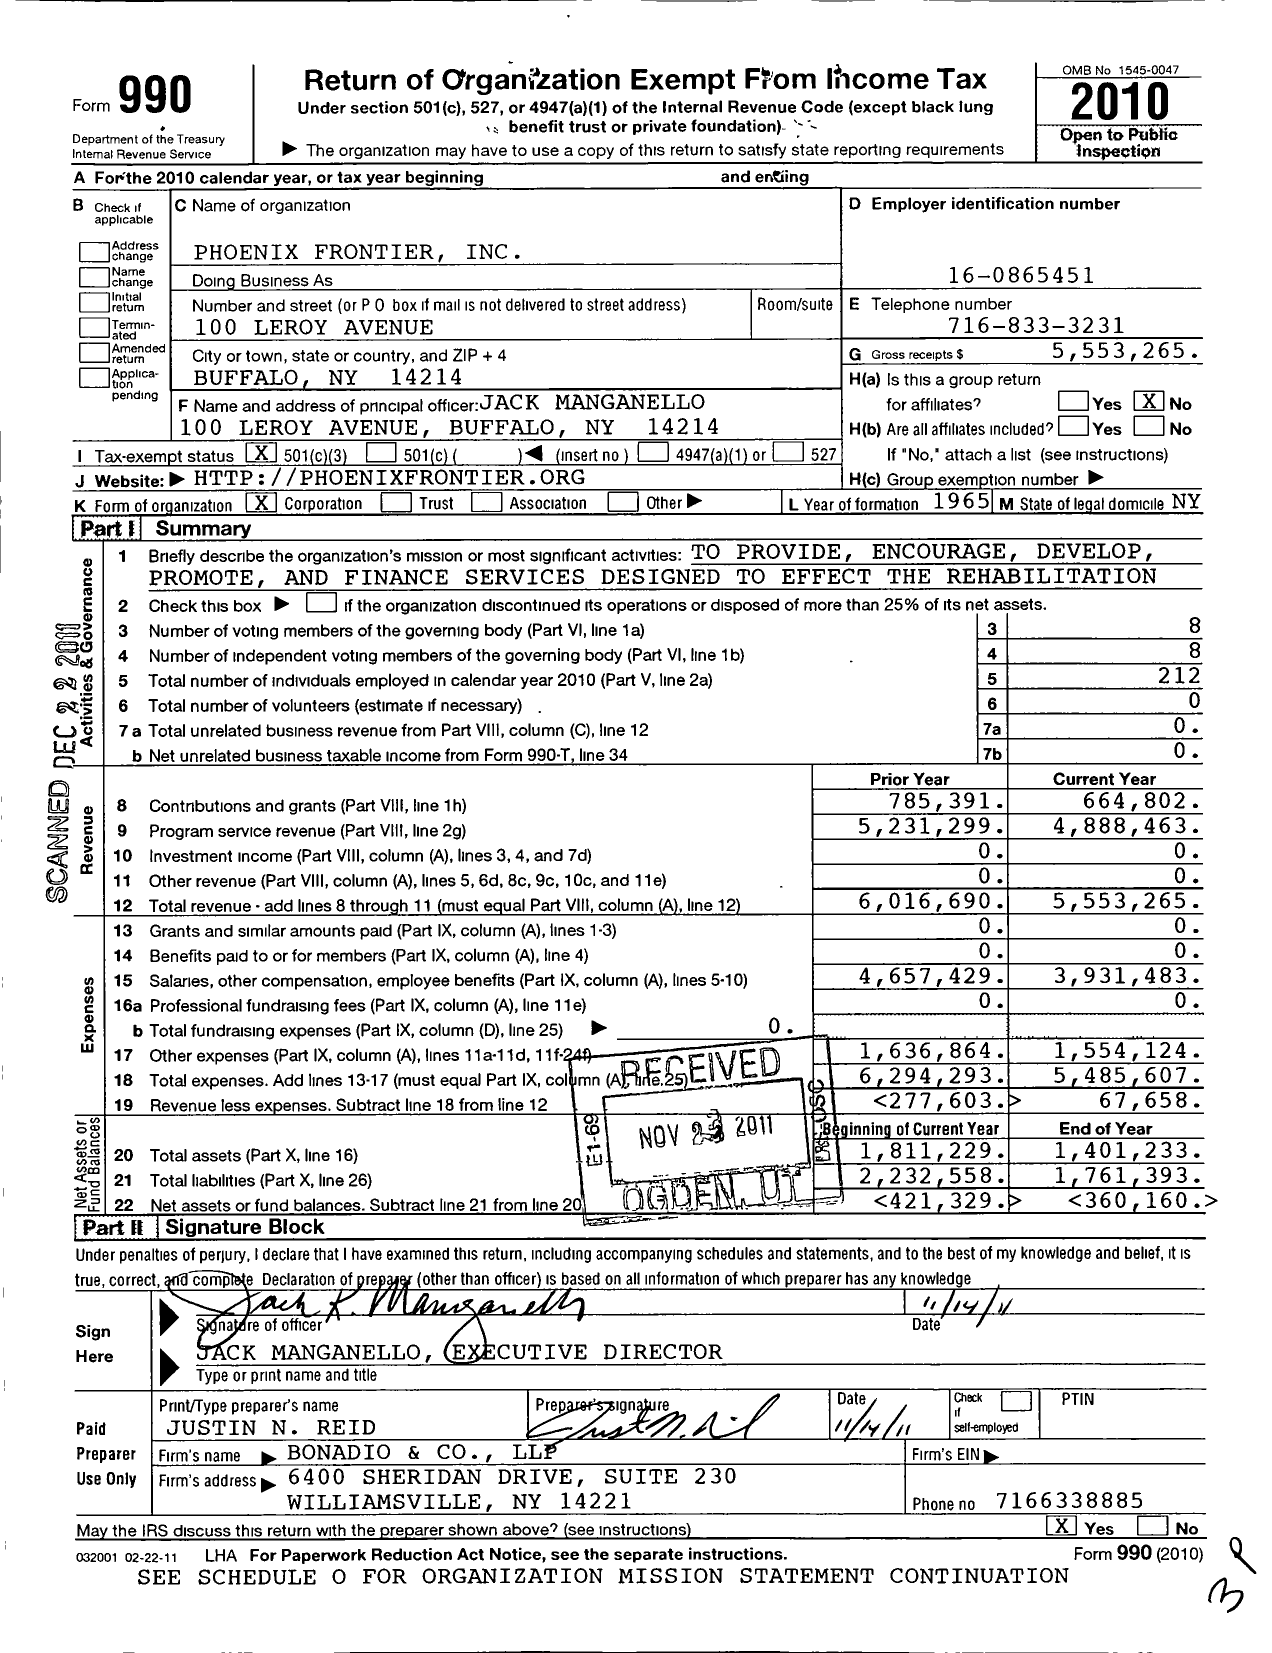 Image of first page of 2010 Form 990 for Phoenix Frontier